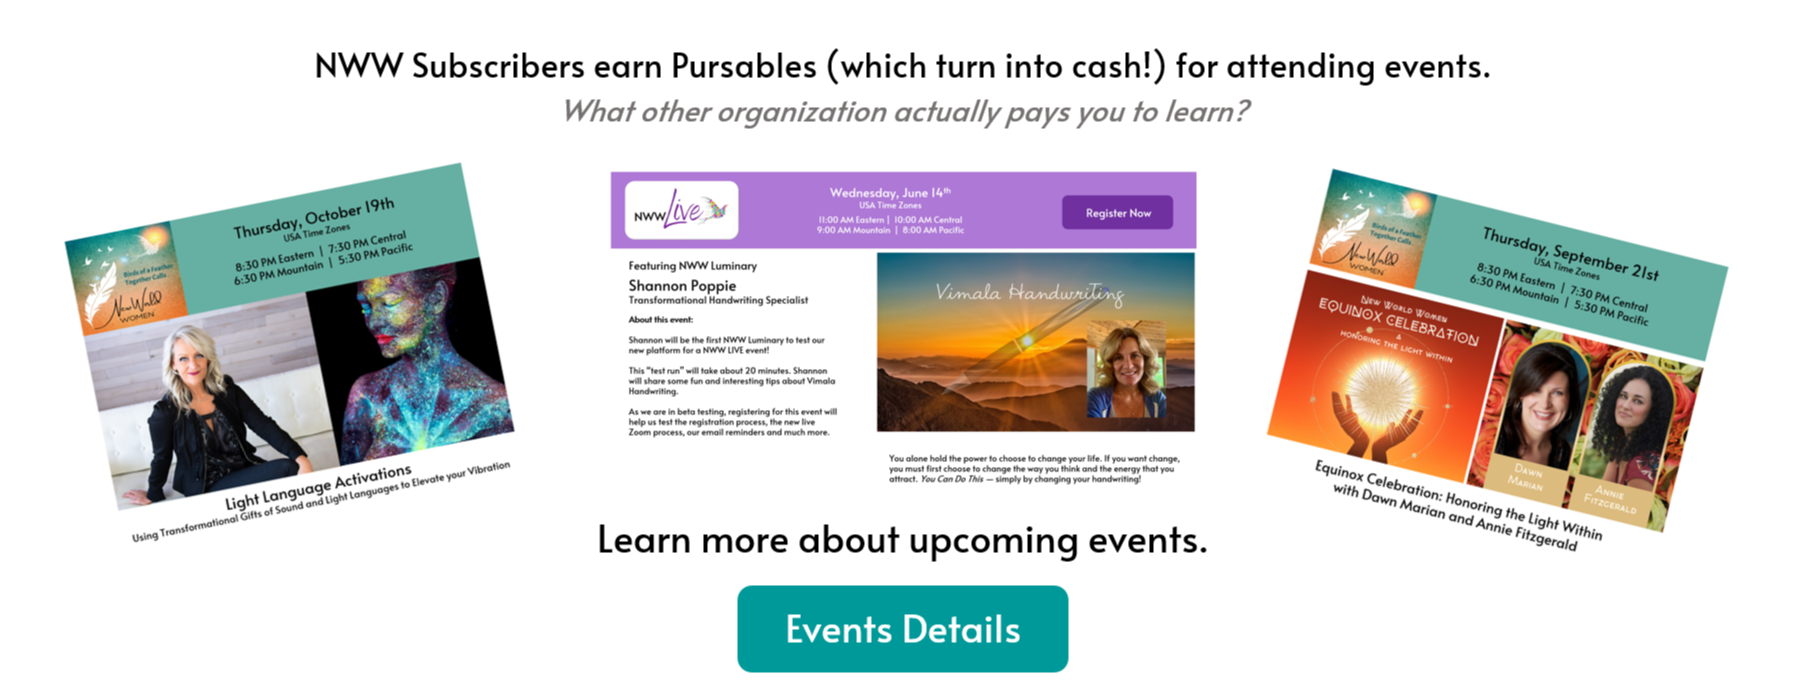 Home Page - Events Details Button